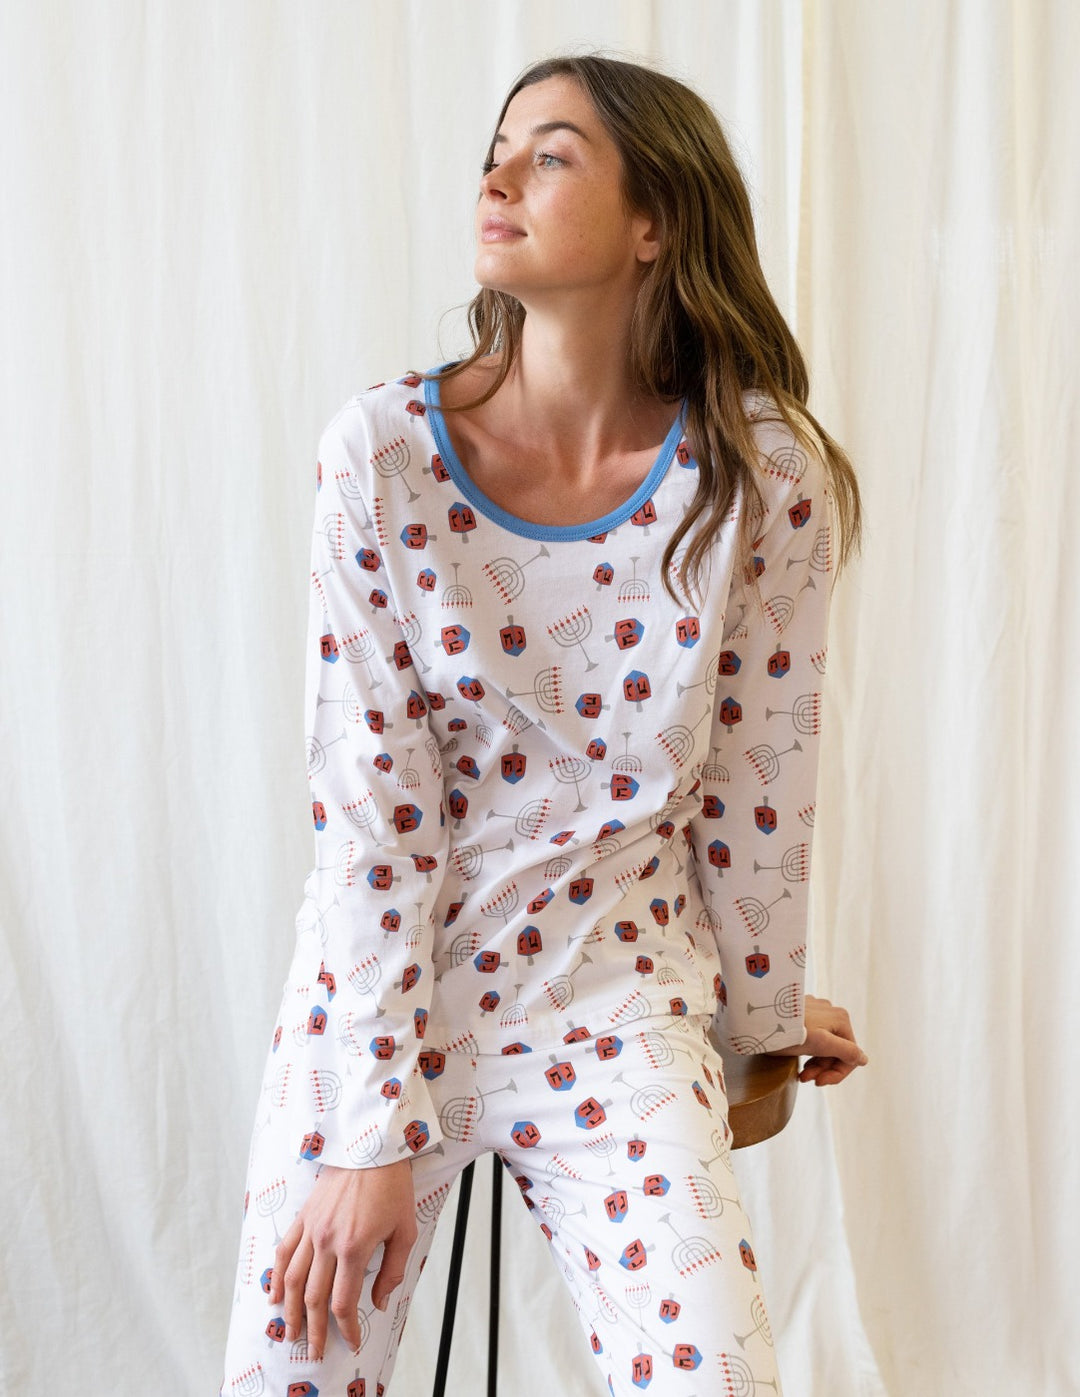 Women's Nightgown  Nightgowns for women, Womens cotton nightgowns, Pajama  dress